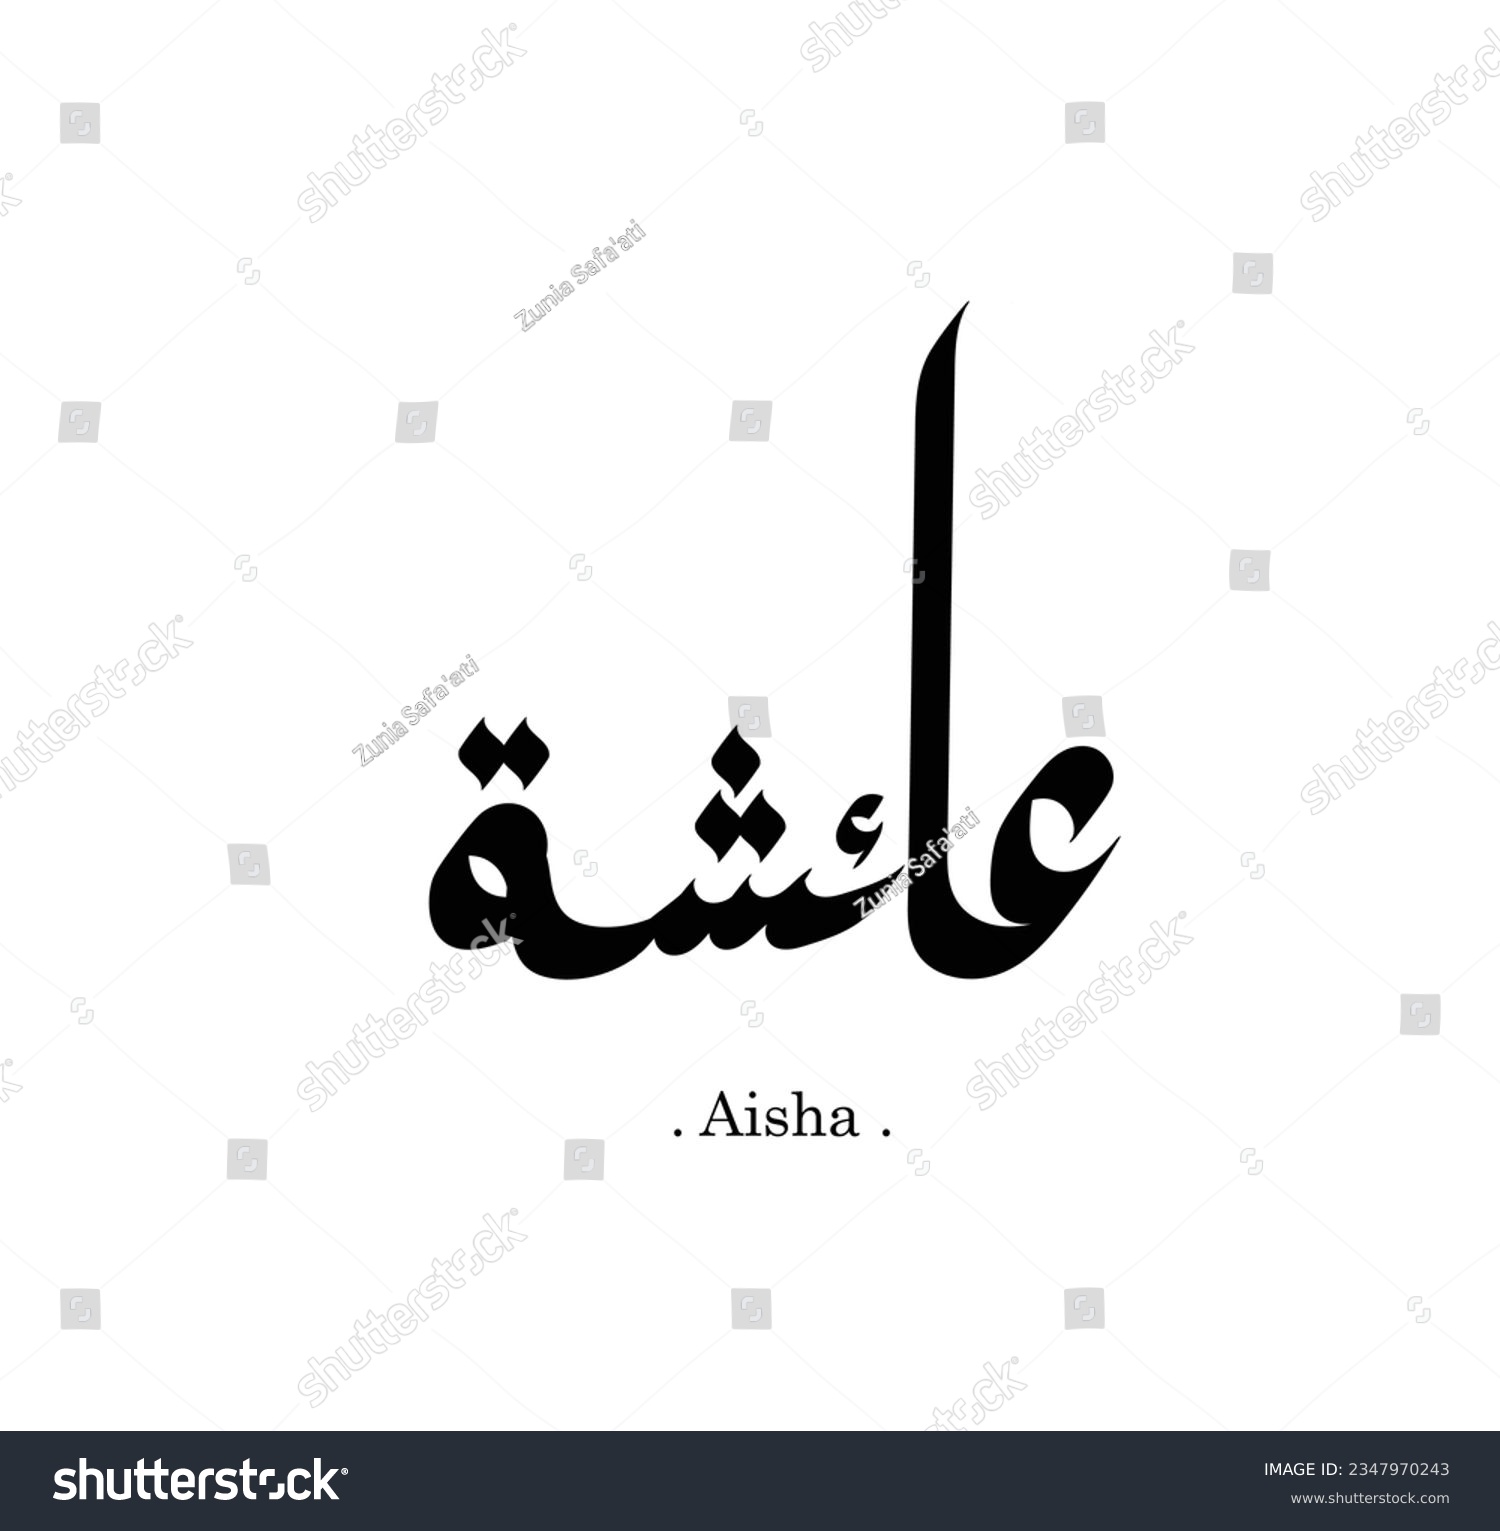 SVG of handwritten of arabic name (Aisha) with simple and flat design svg